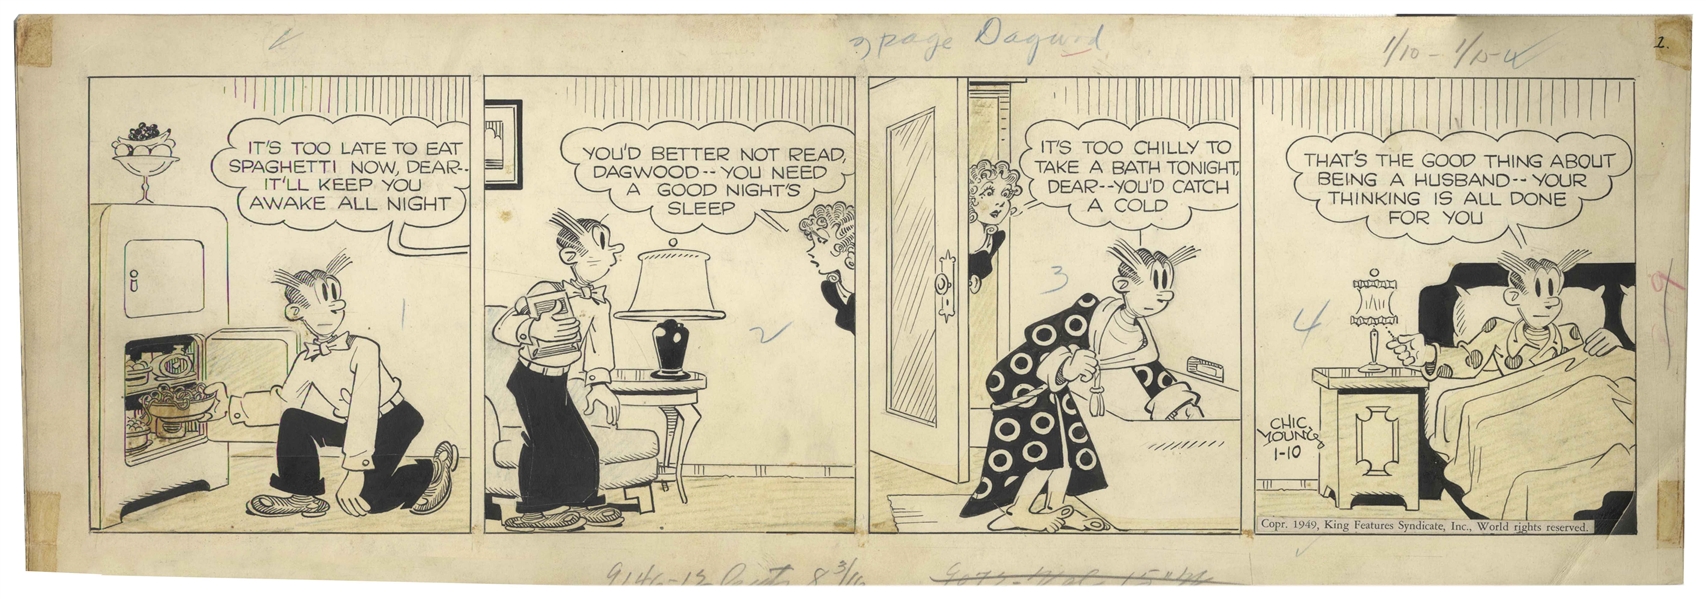 Chic Young Hand-Drawn ''Blondie'' Comic Strip From 1949 Titled ''No Wonder His Brain Is Sluggish!'' -- Blondie Worries About Dagwood a Little Too Much